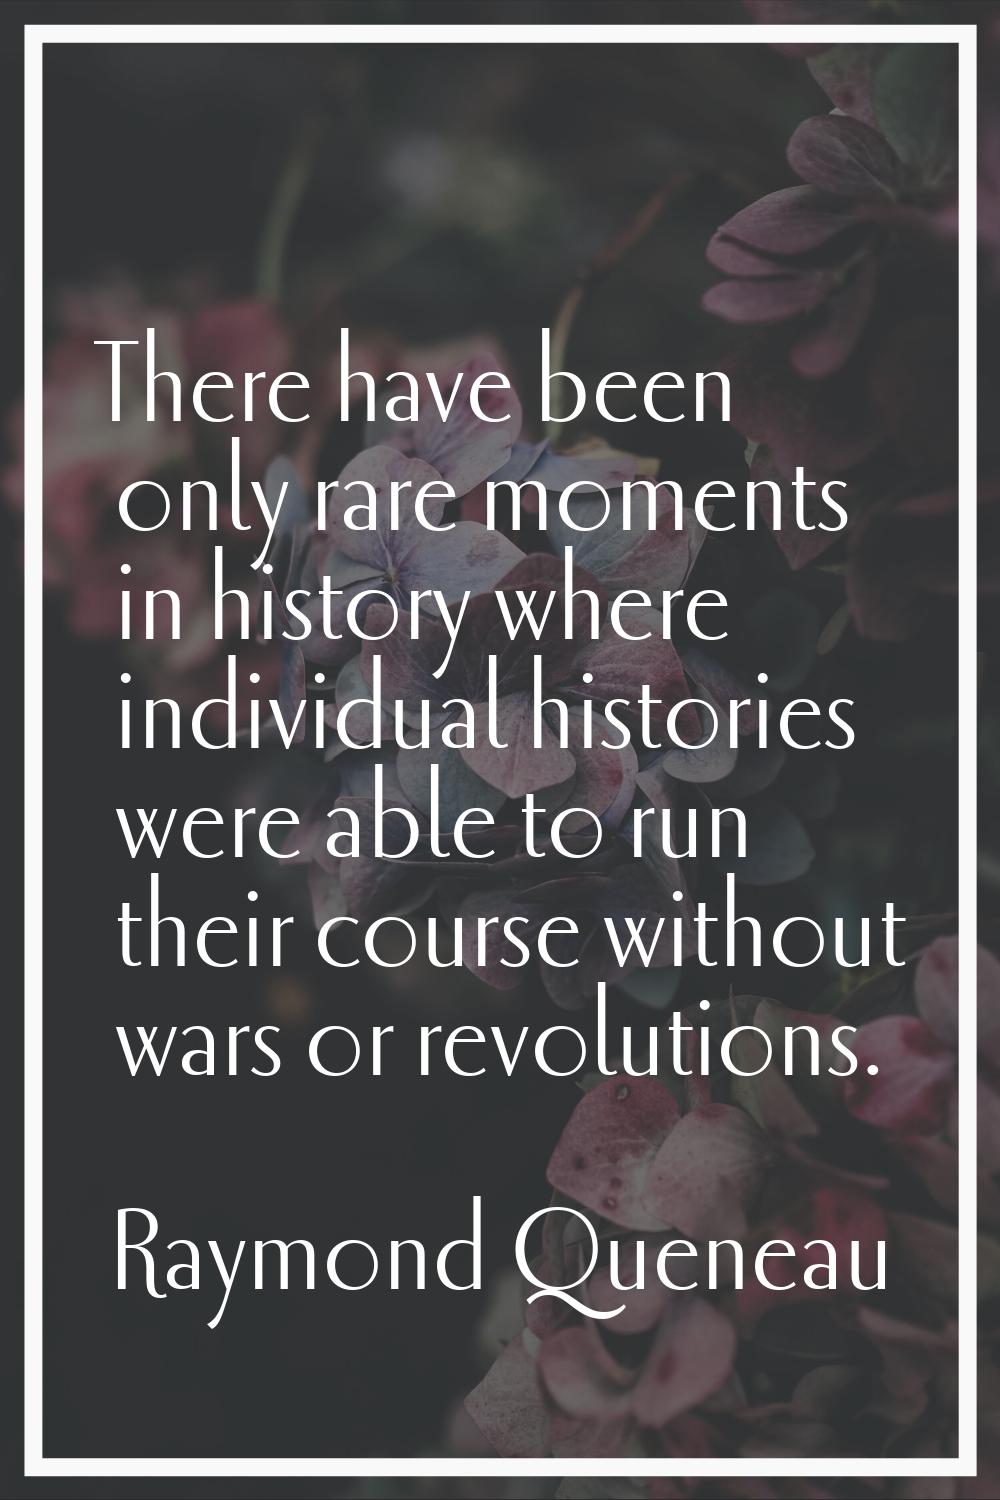 There have been only rare moments in history where individual histories were able to run their cour